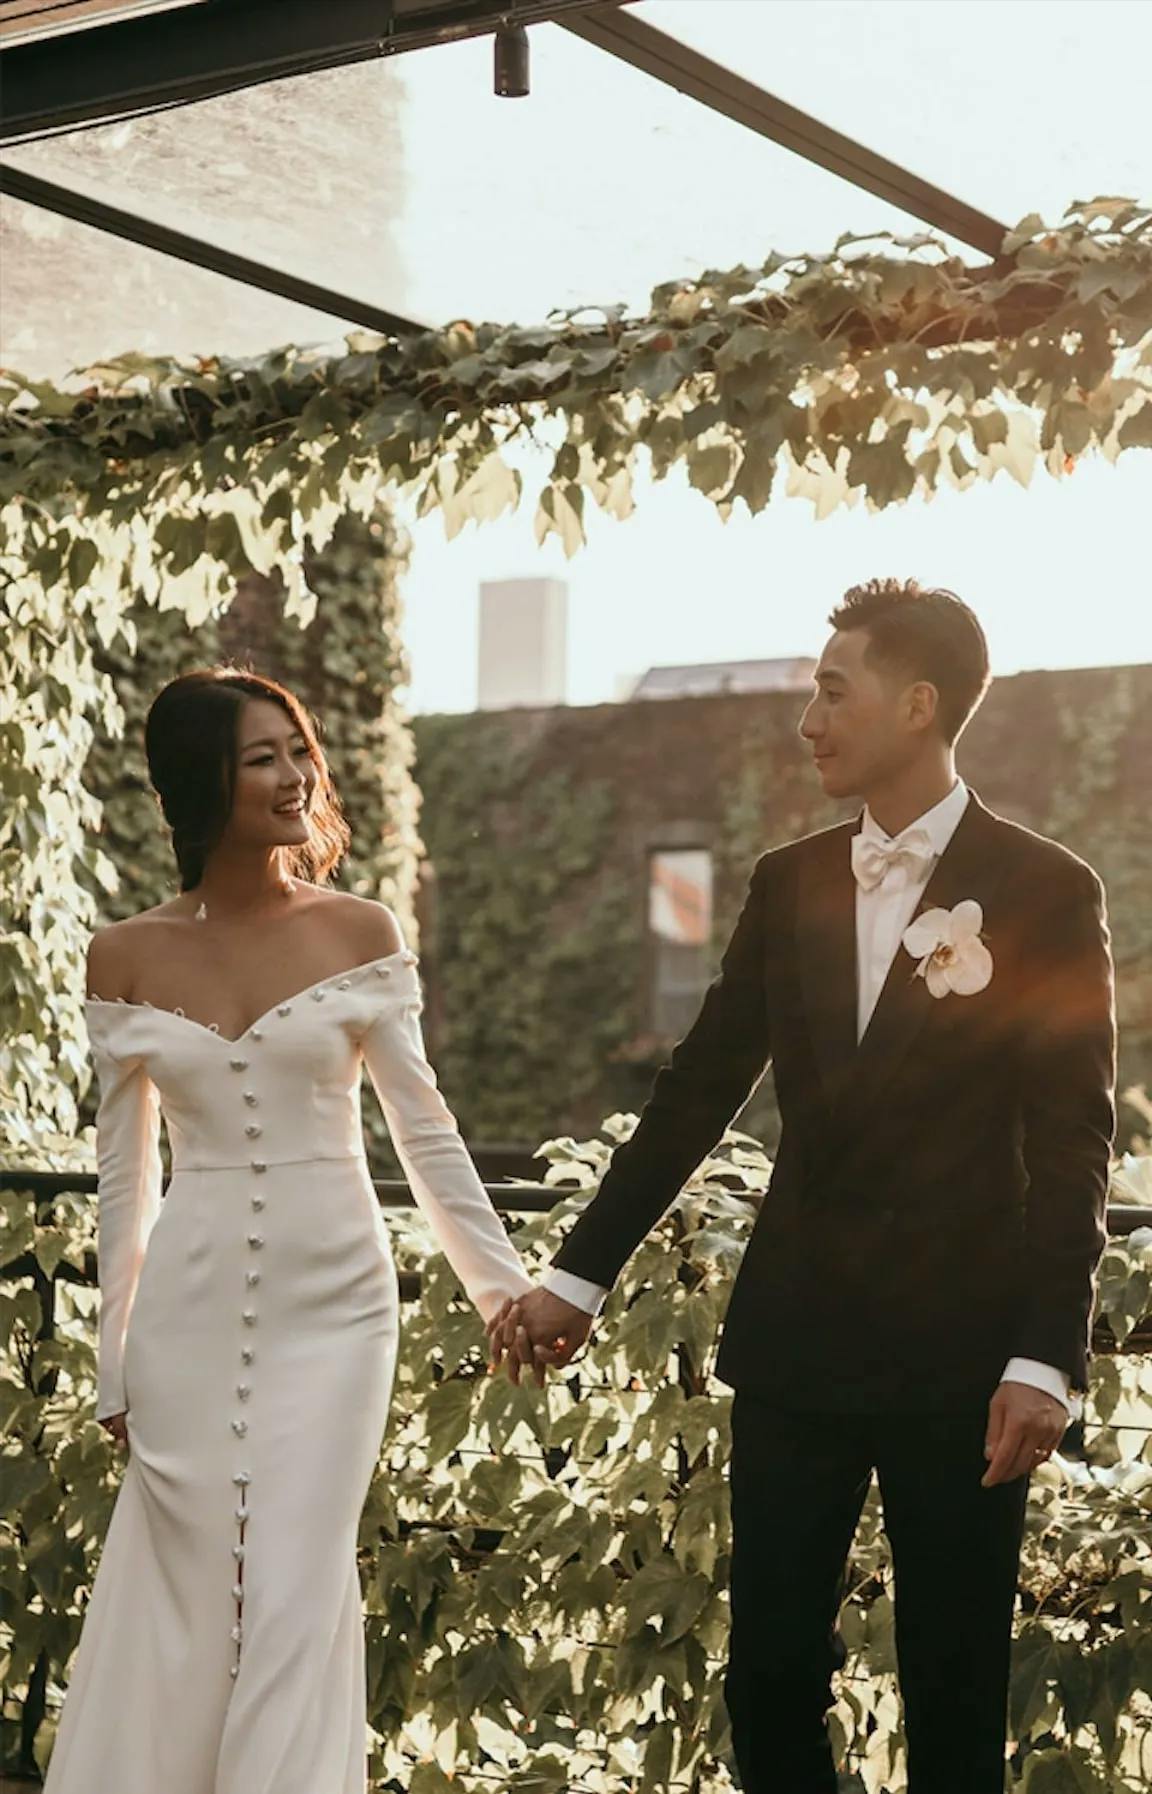 A bride and groom stand outdoors holding hands, both smiling at each other. The bride is wearing an elegant off-shoulder white dress with buttons down the front, while the groom is in a black tuxedo with a white shirt and bow tie. They are surrounded by greenery.